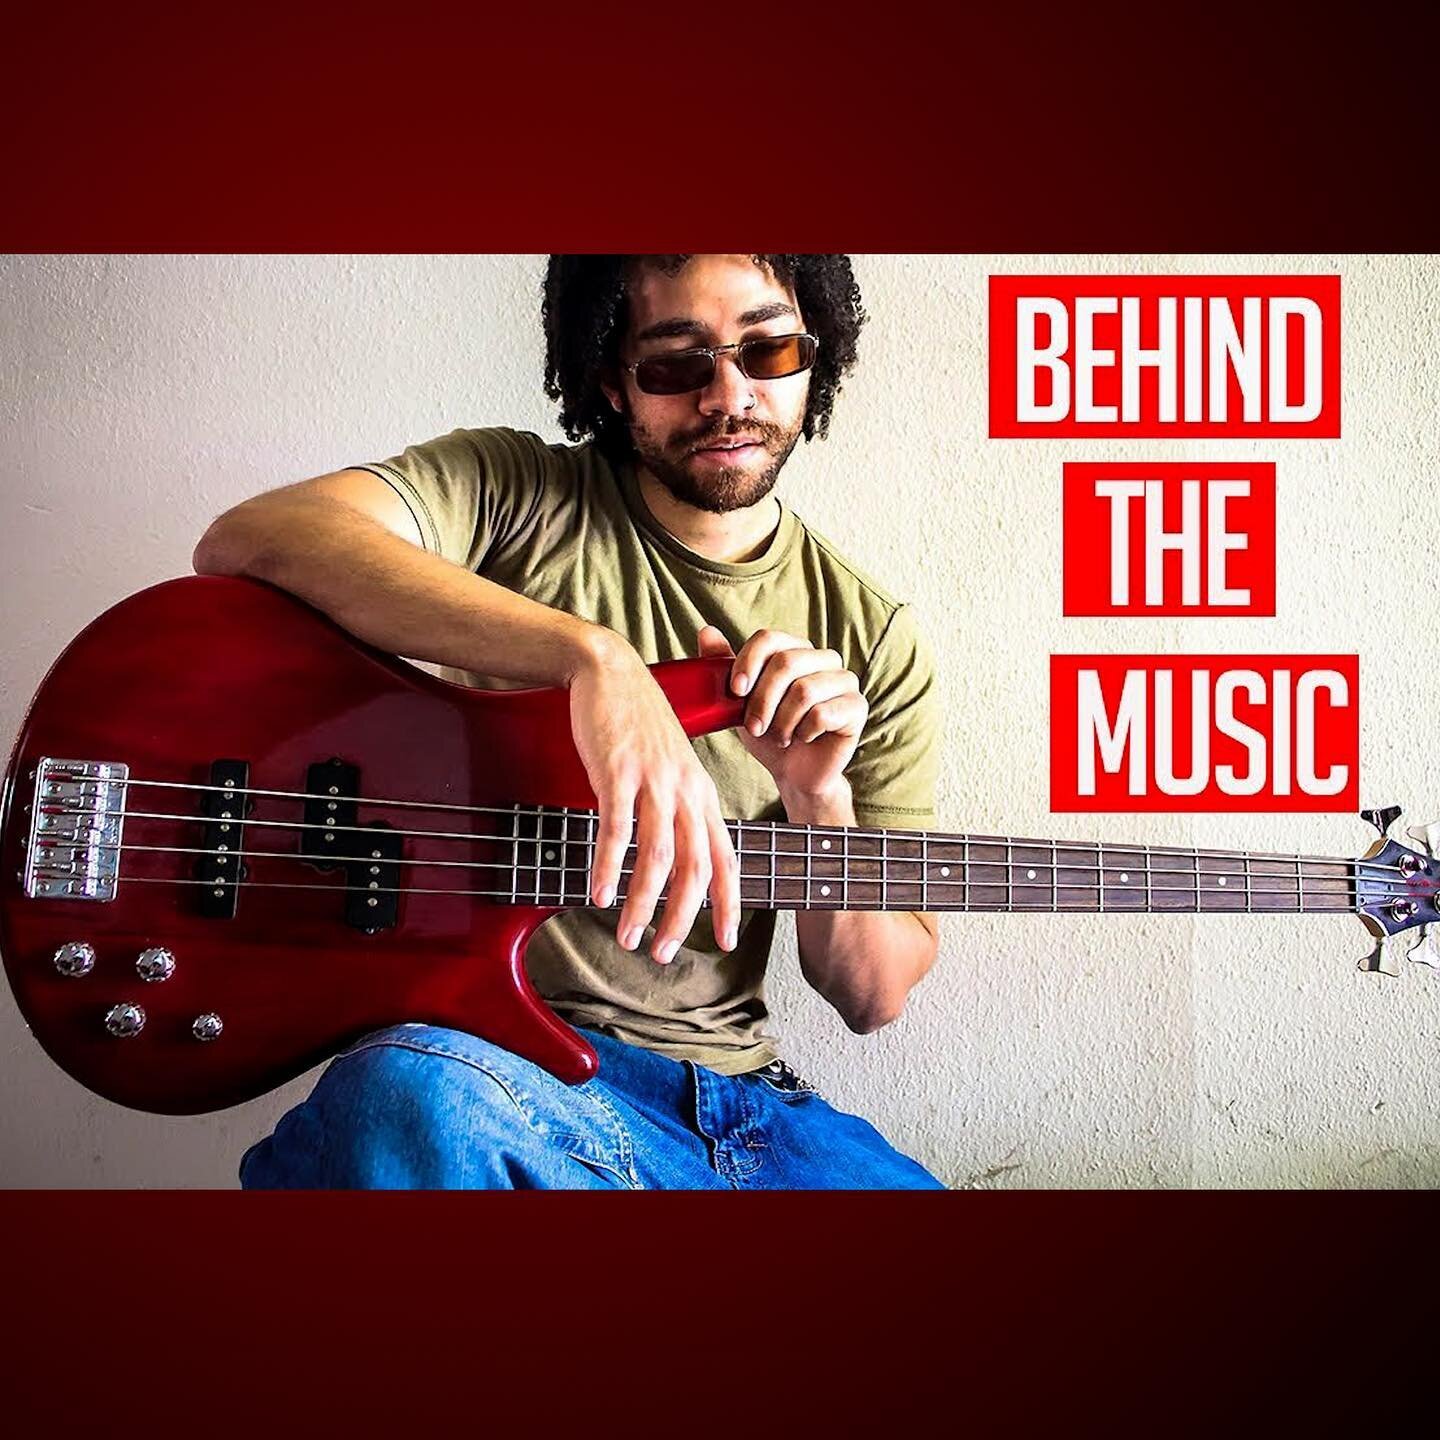 Anyone ever watch the old Behind the music series on VH1? I used to really like seeing what inspired the artists to do what they do.
#stringsofatlas #skytitanmedia #atxlife #atxmusic #vlogger #music